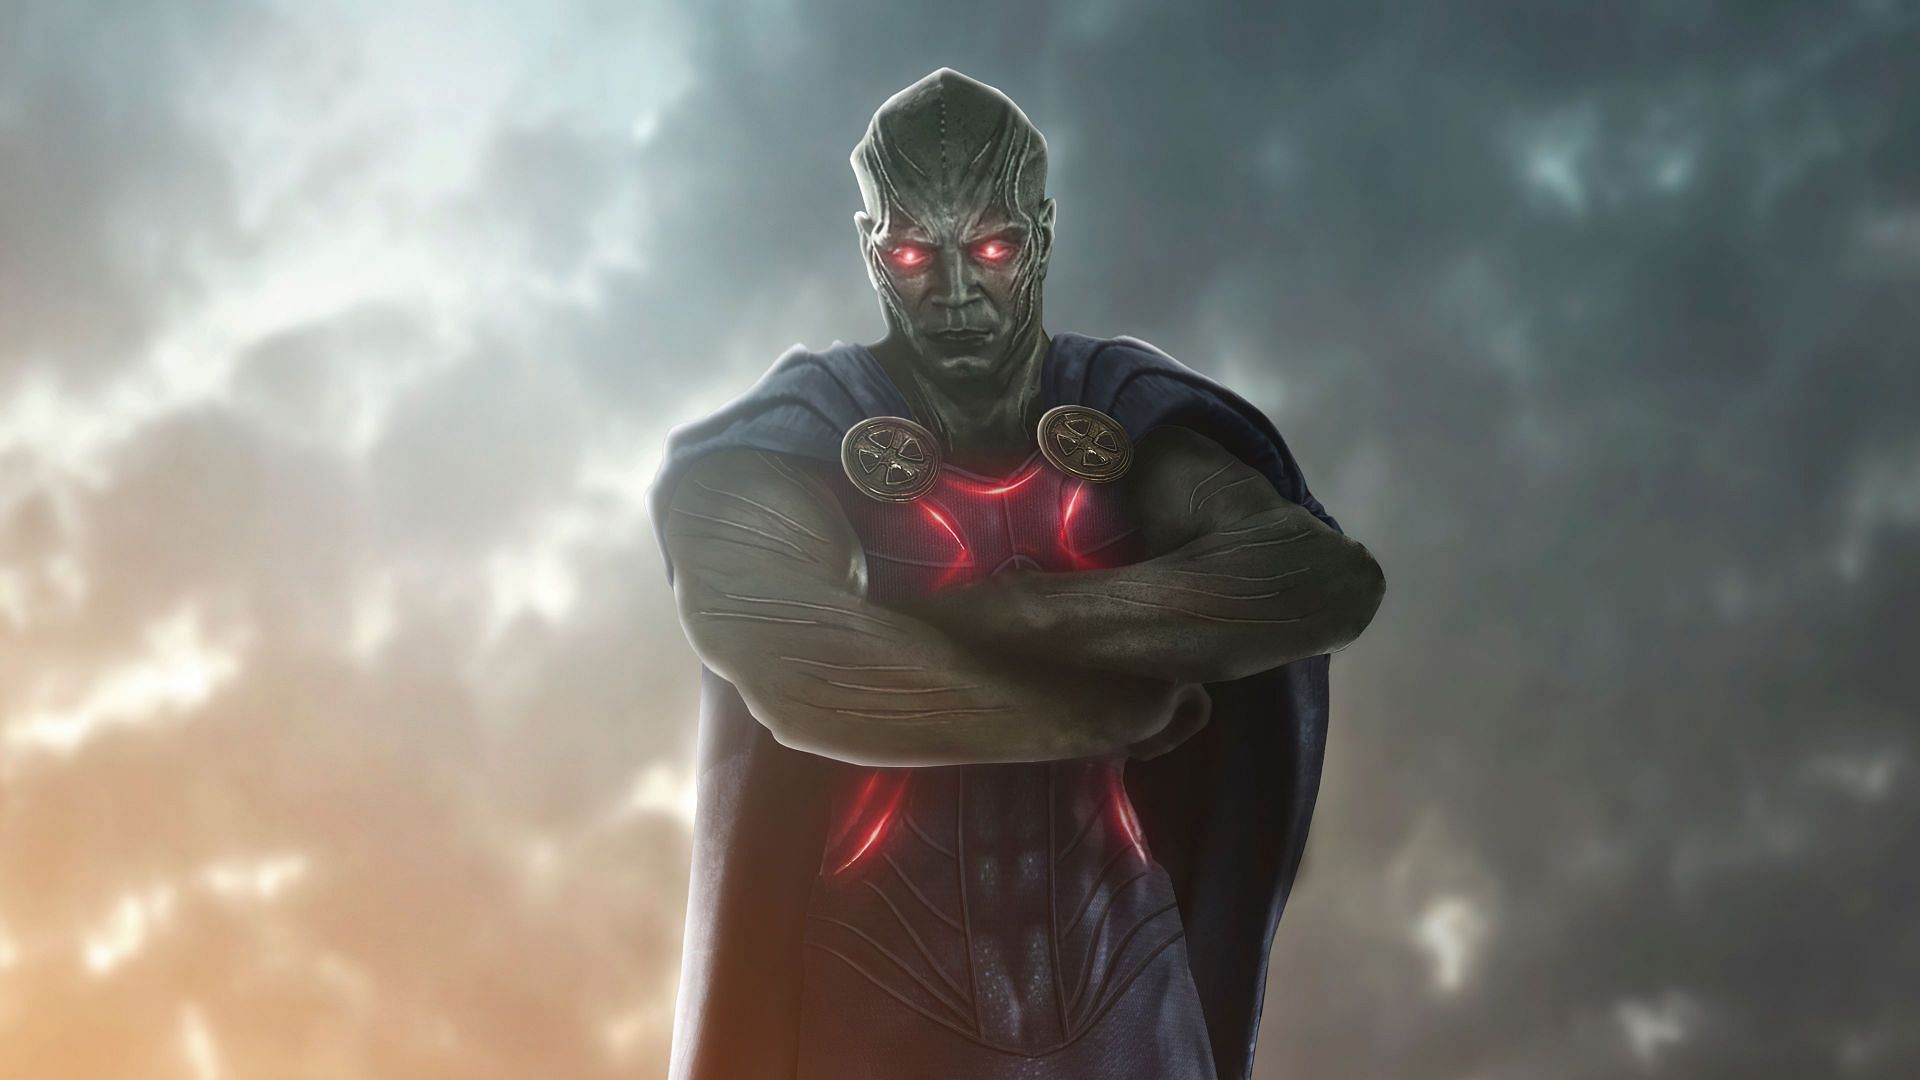 Martian Manhunter is a formidable being. (Image via DC Universe)